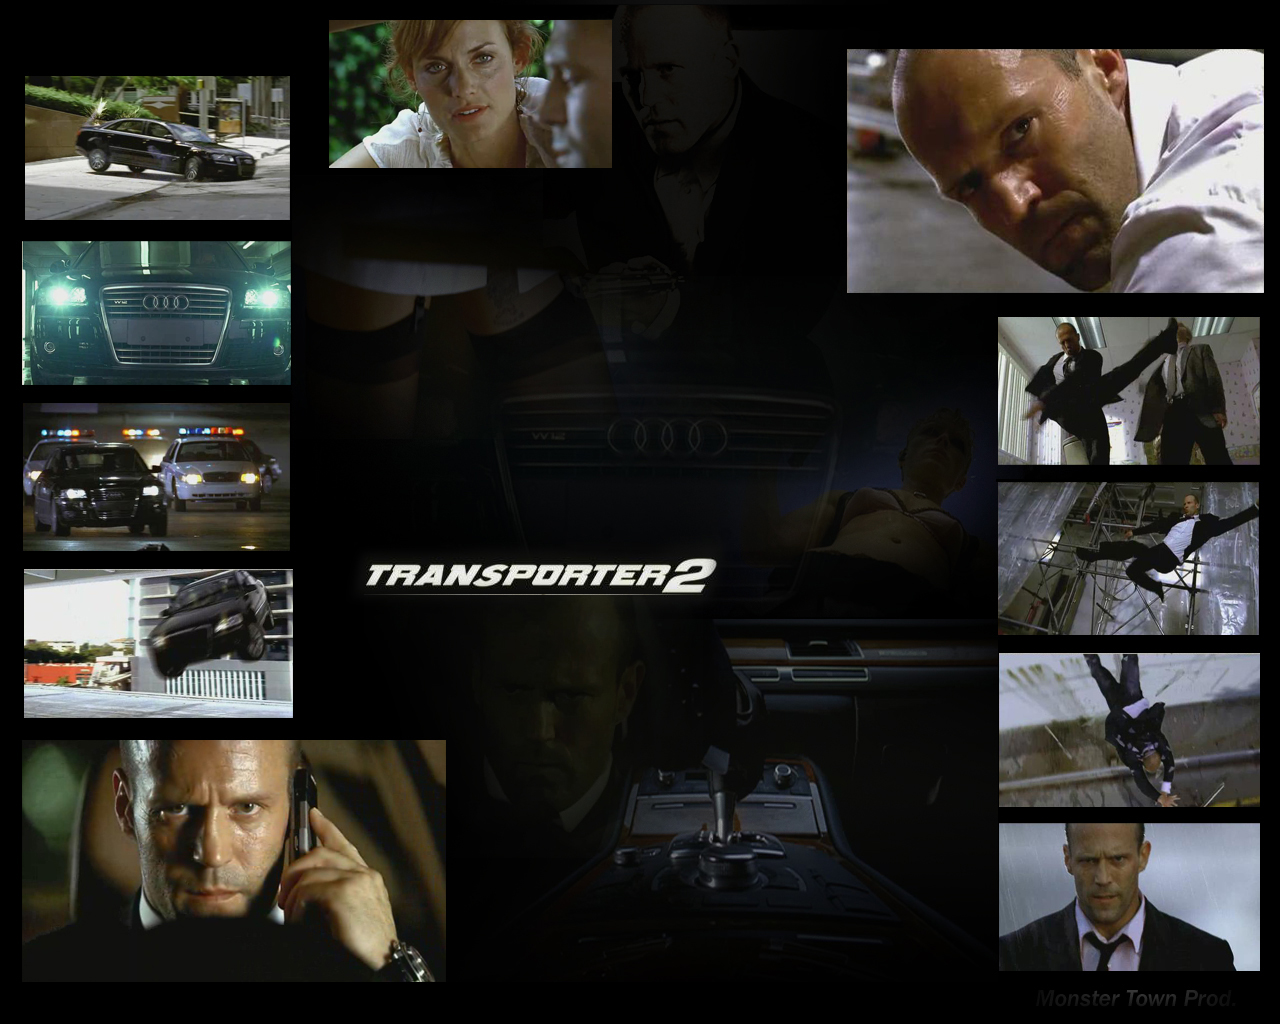 You are viewing the movie transporter2 wallpaper named Transporter 